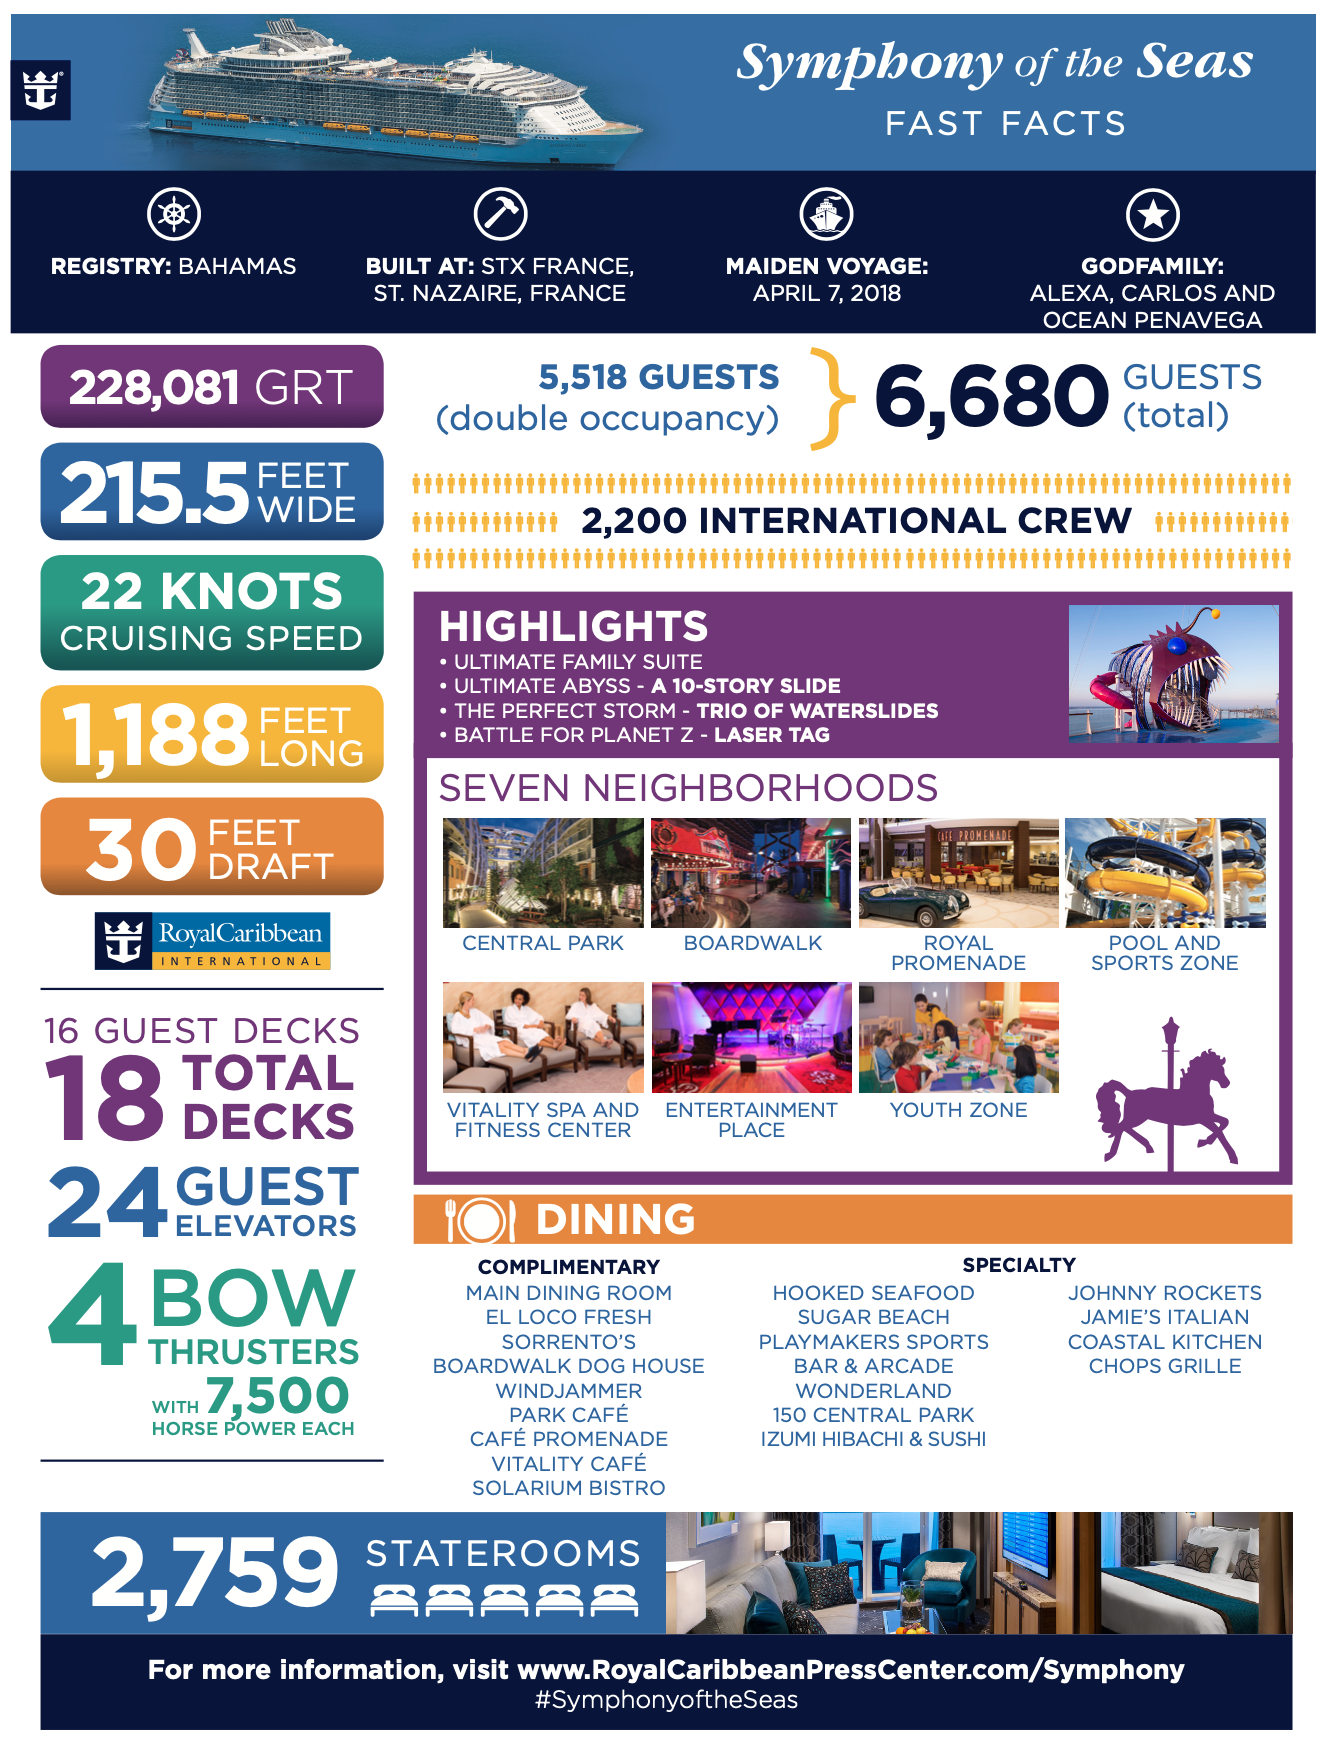 The Symphony Of The Seas For Families. The Symphony Of The Seas facts about the ship and what it has onboard.